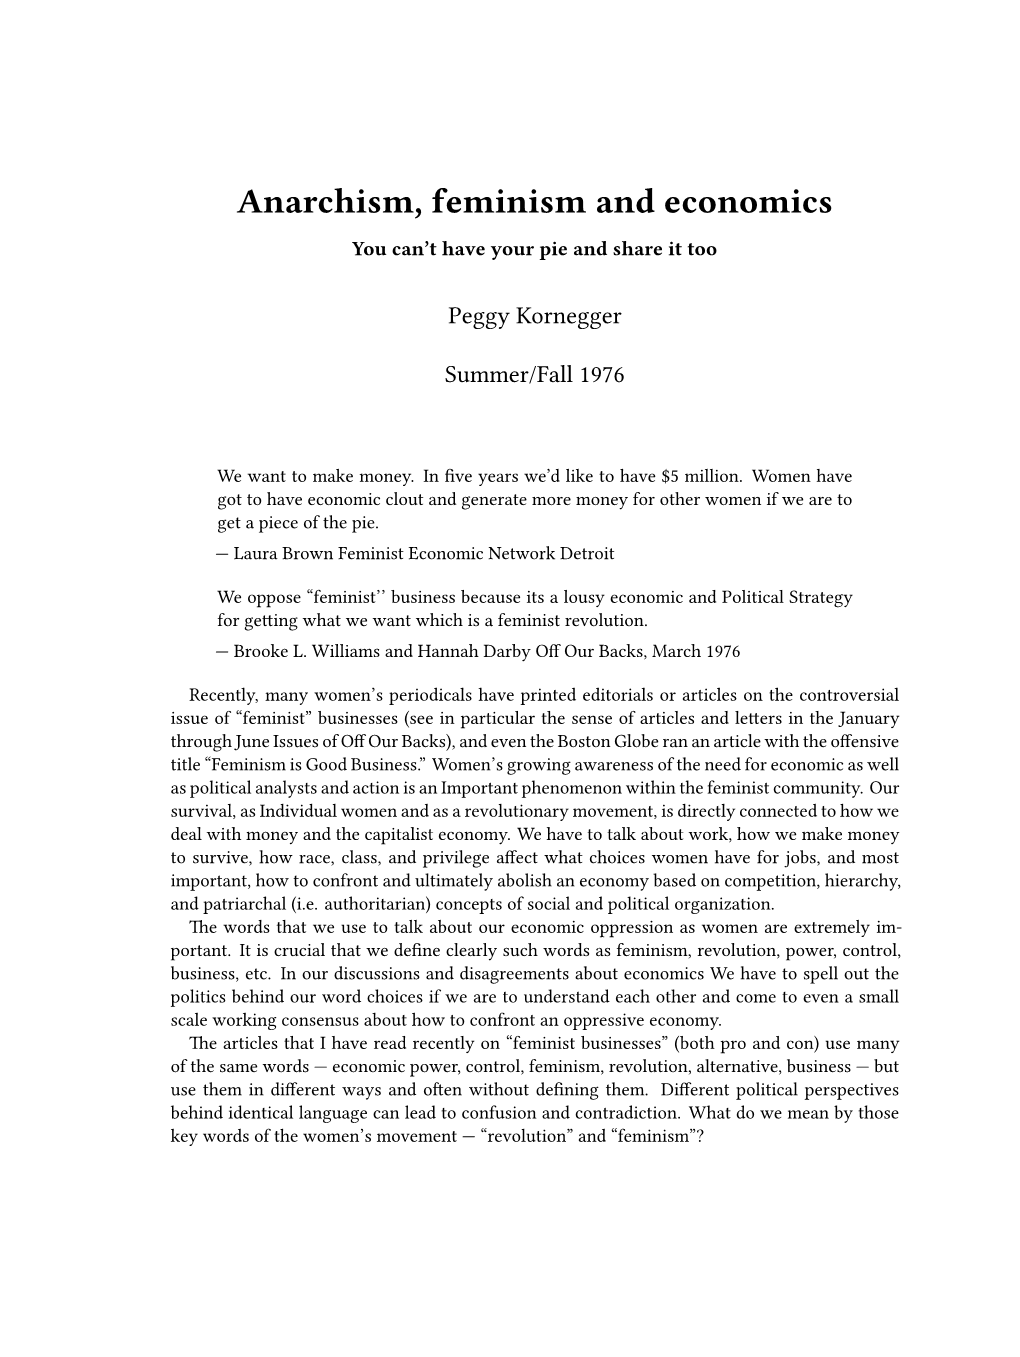 Anarchism, Feminism and Economics You Can’T Have Your Pie and Share It Too